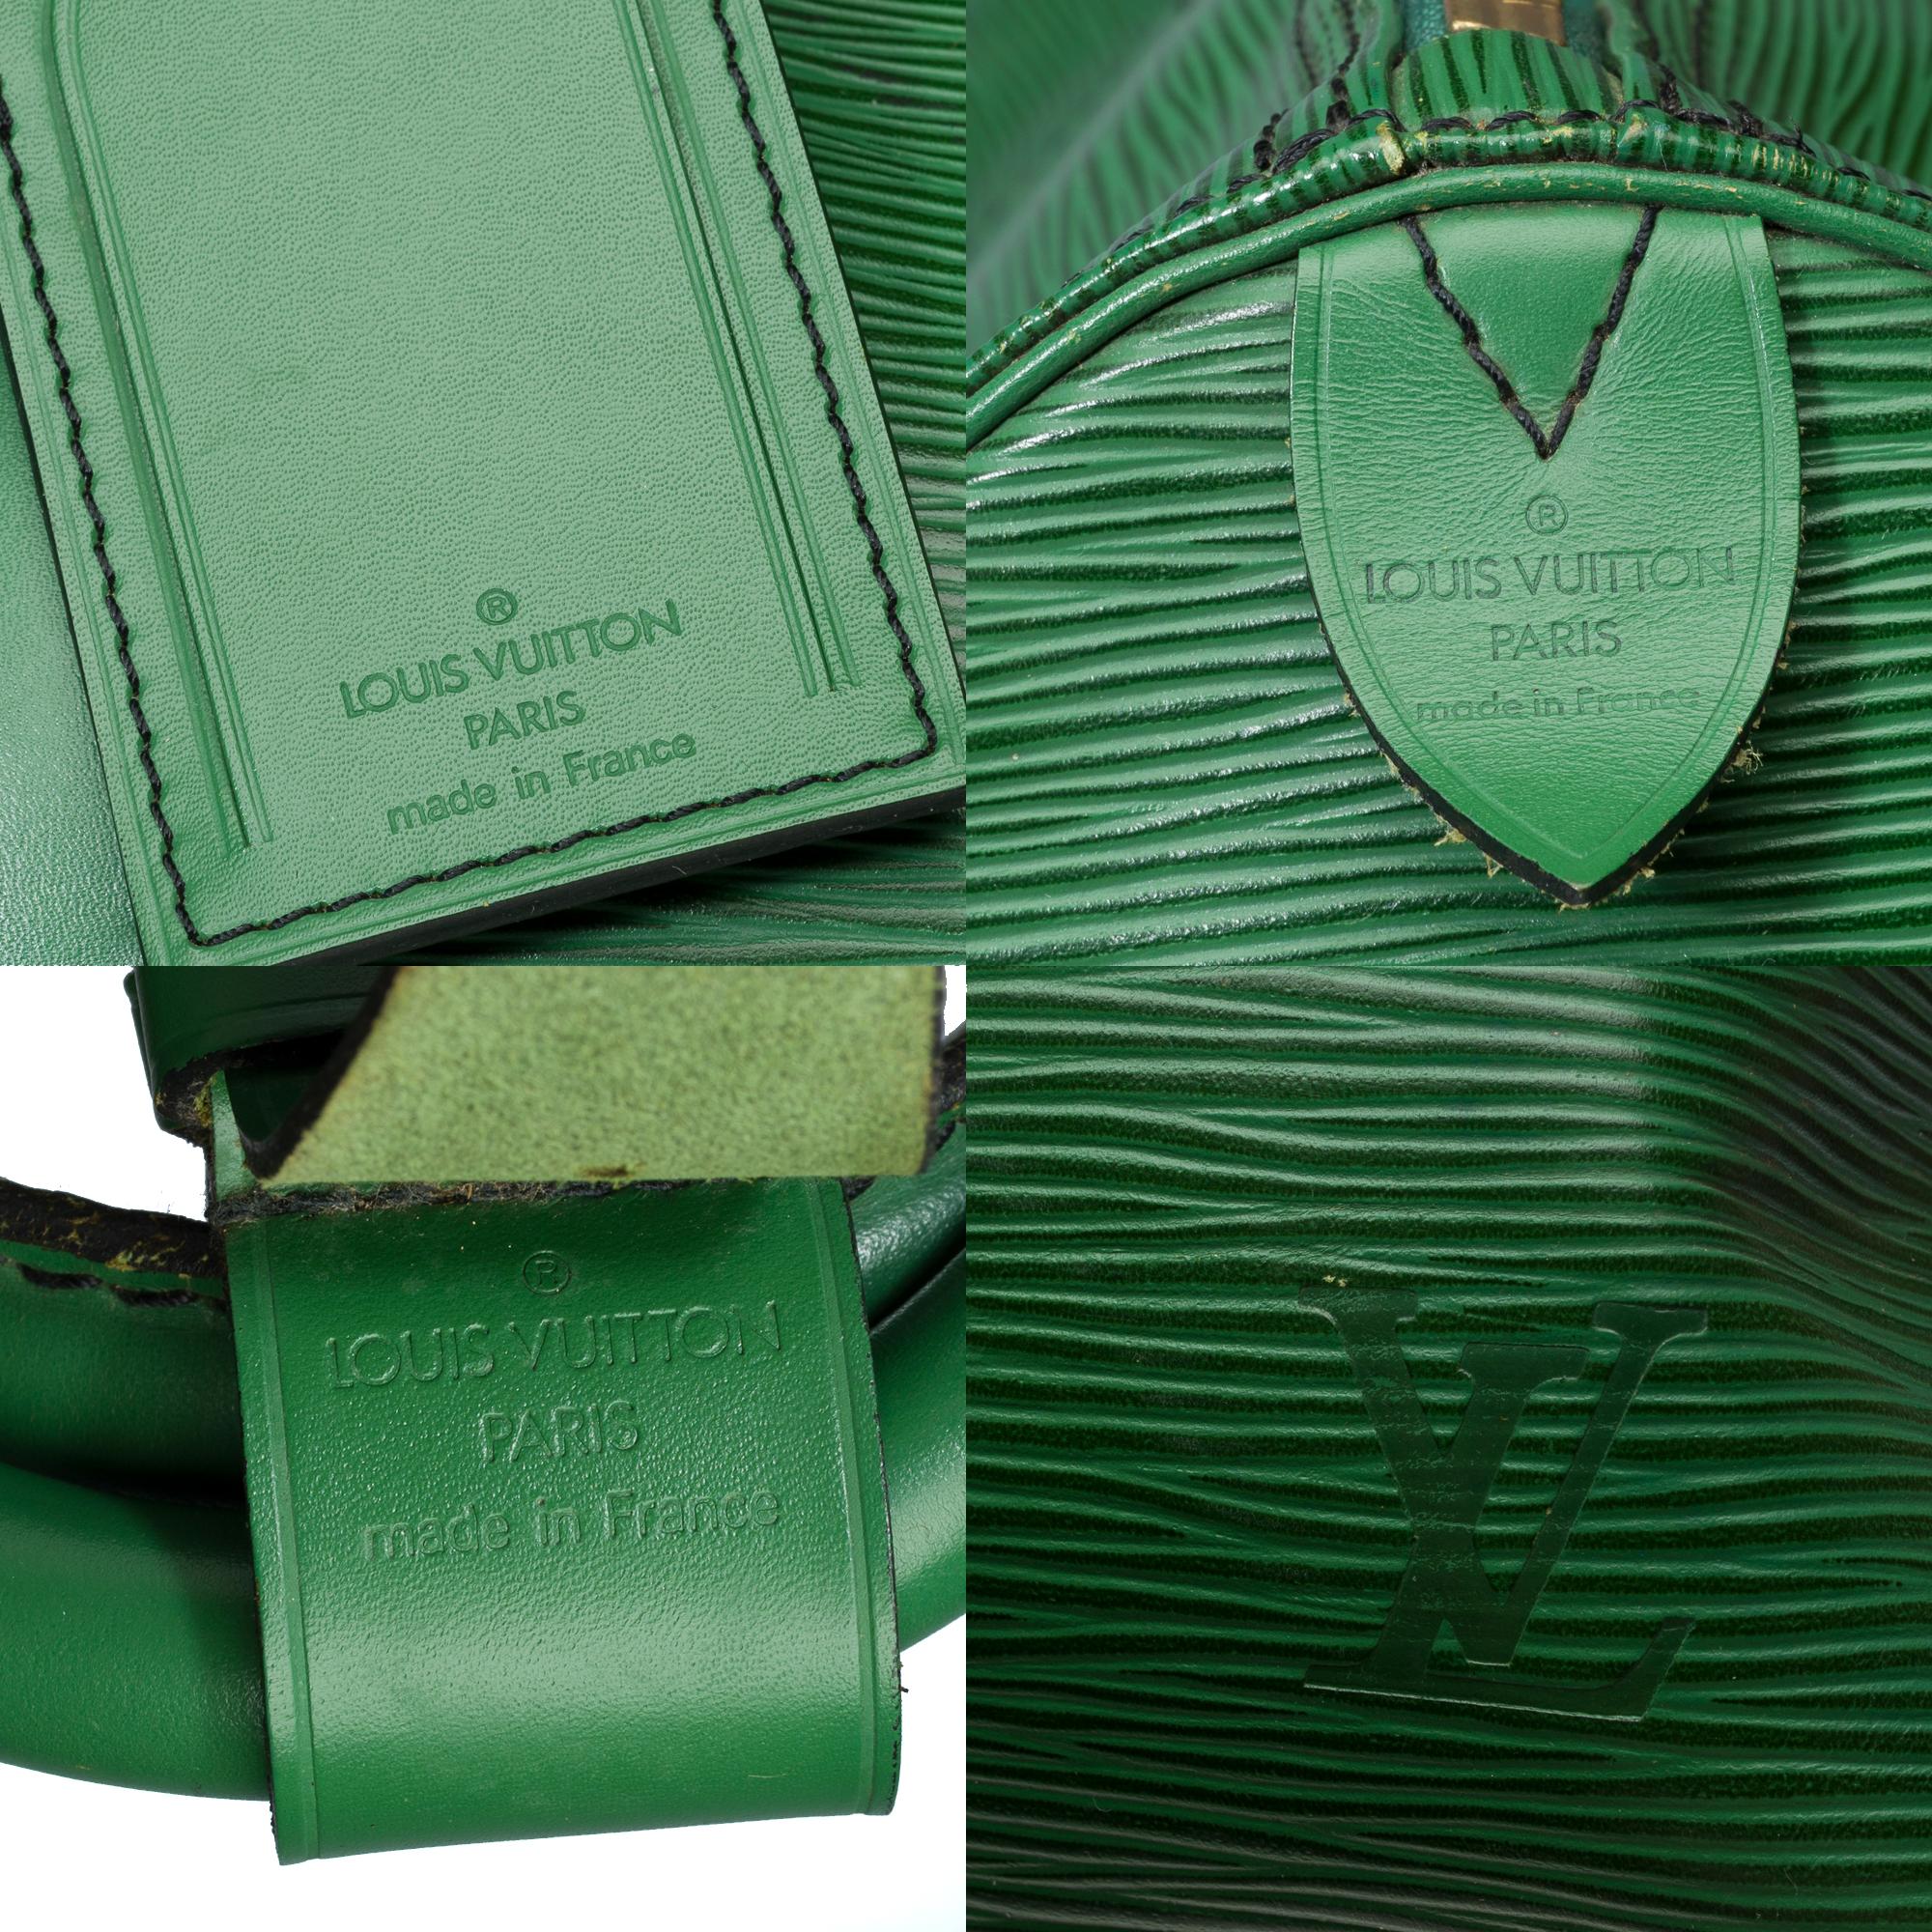 Louis Vuitton Keepall 50 Travel bag in Green épi leather, GHW 2